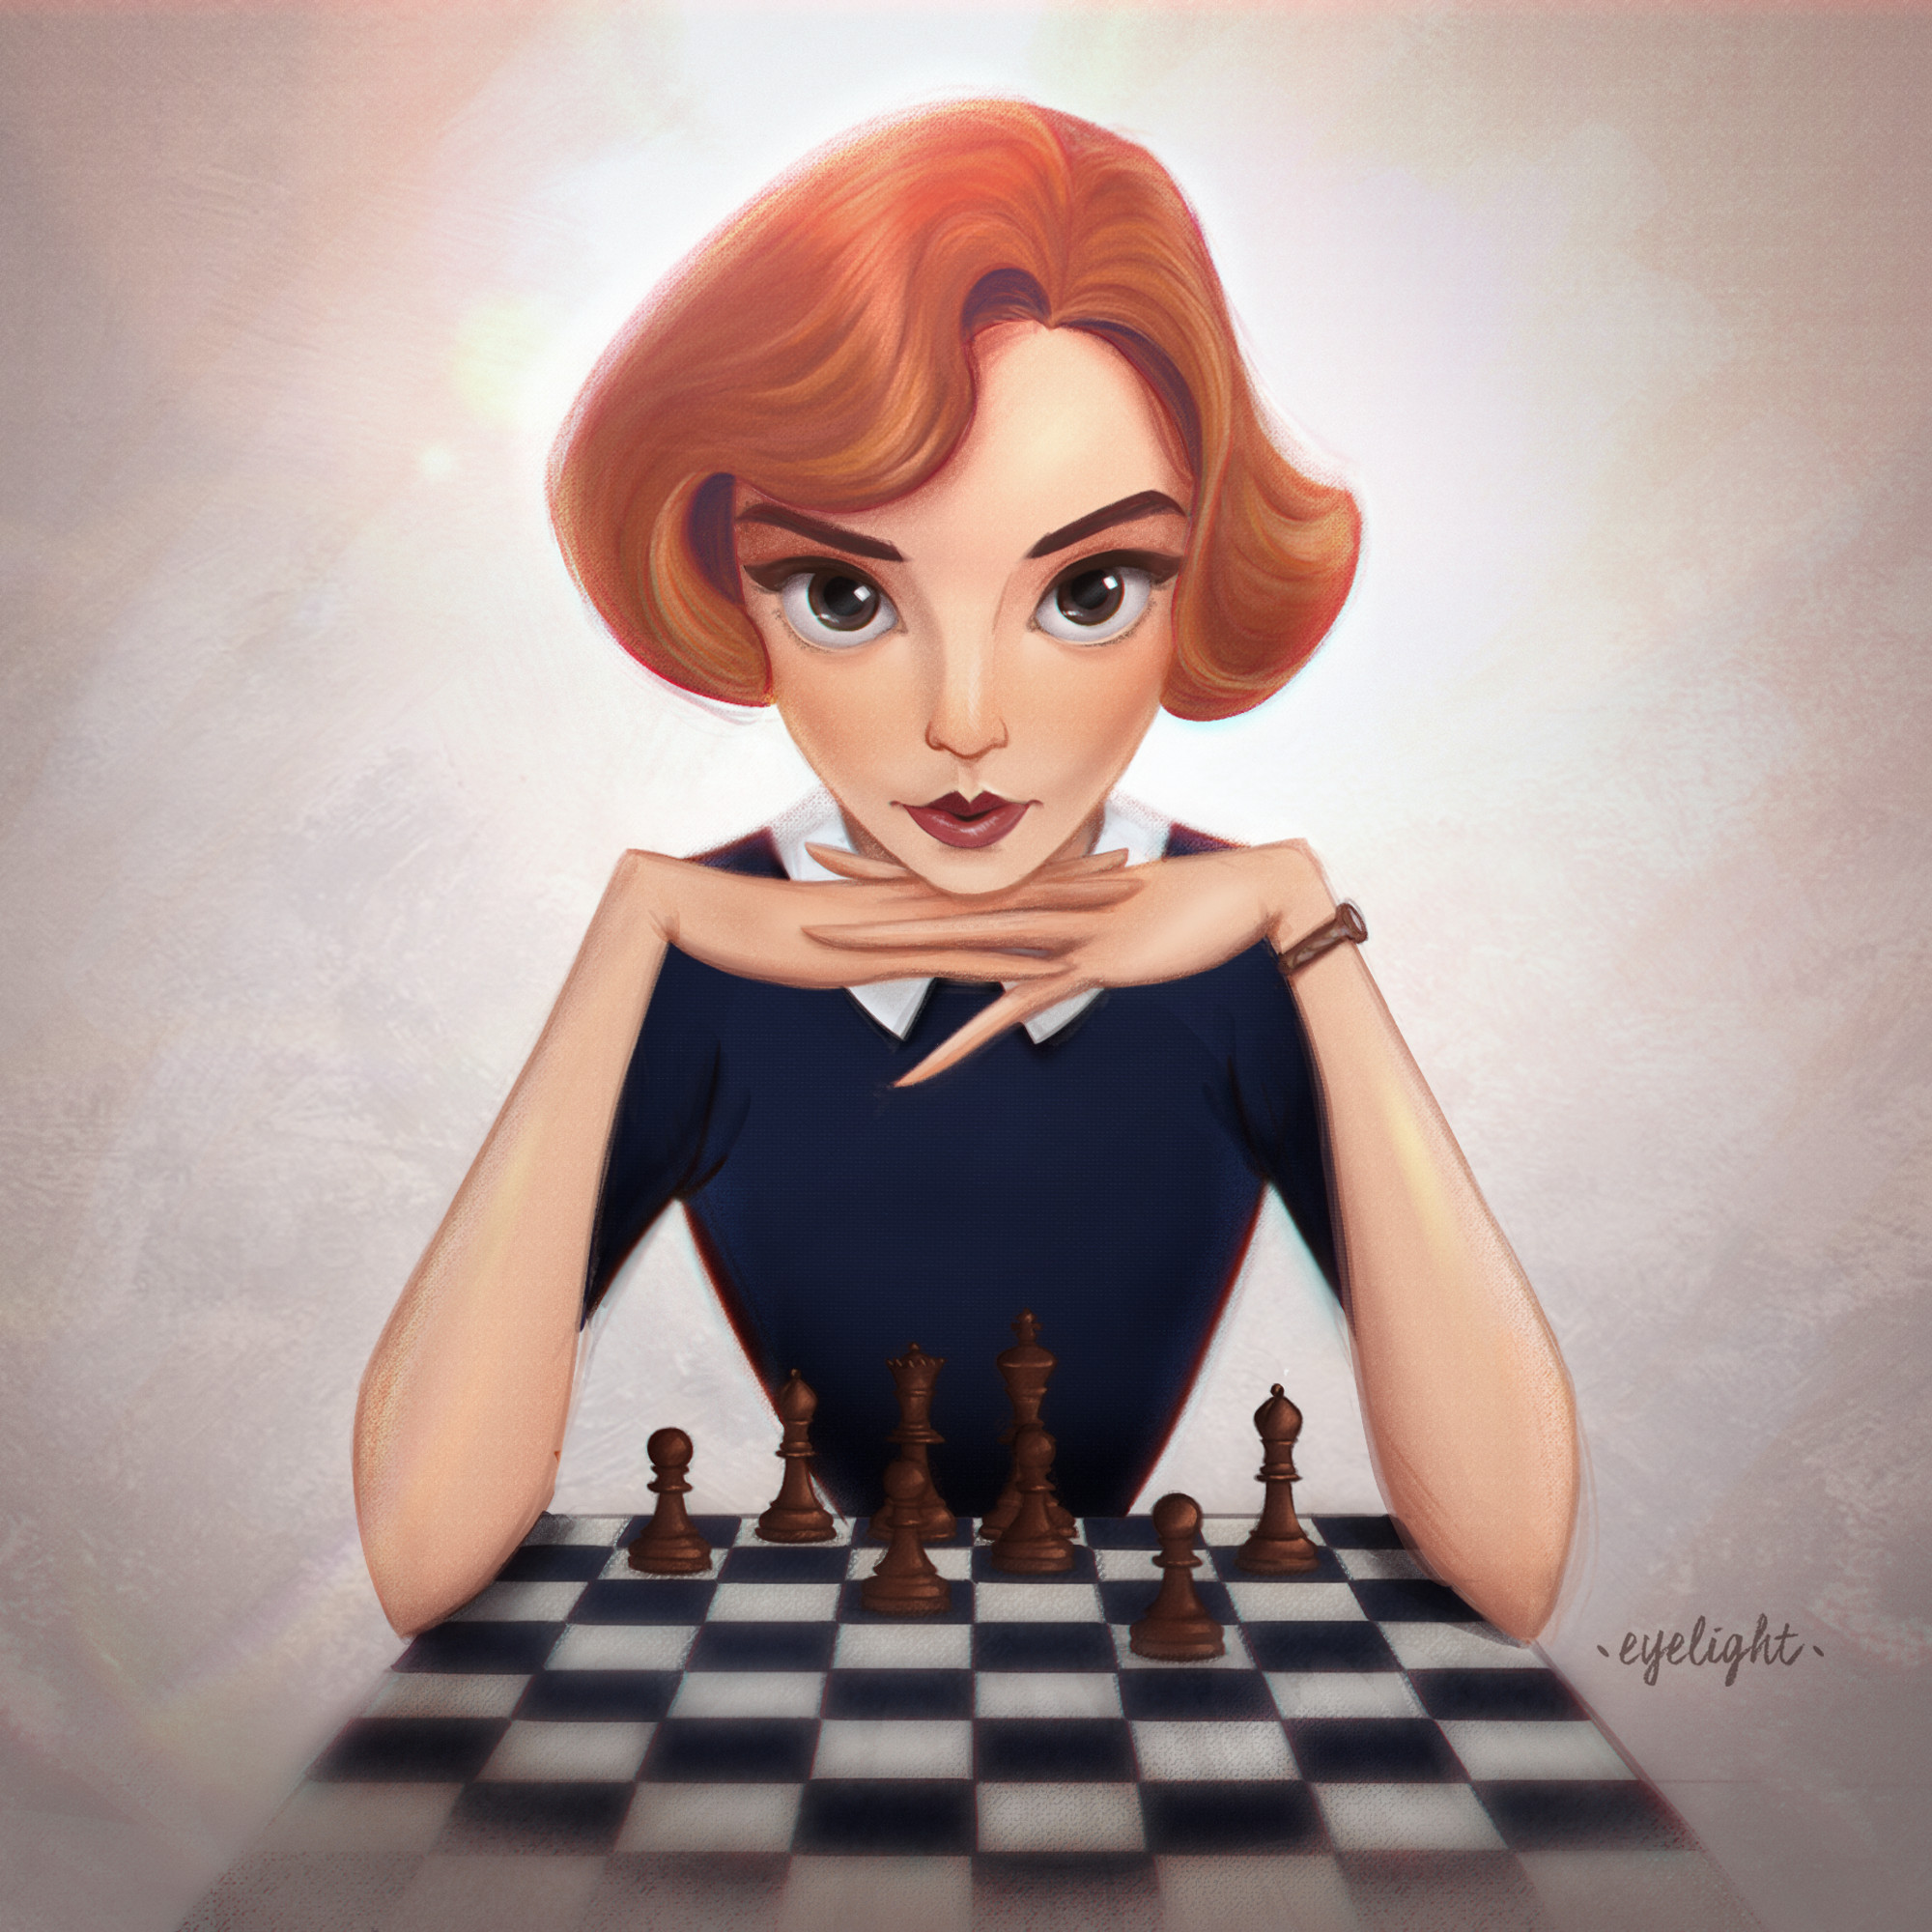 Valentina Contini Fan Art Looking At Viewer Chess Young Woman Digital Art Simple Background Hands La 2000x2000